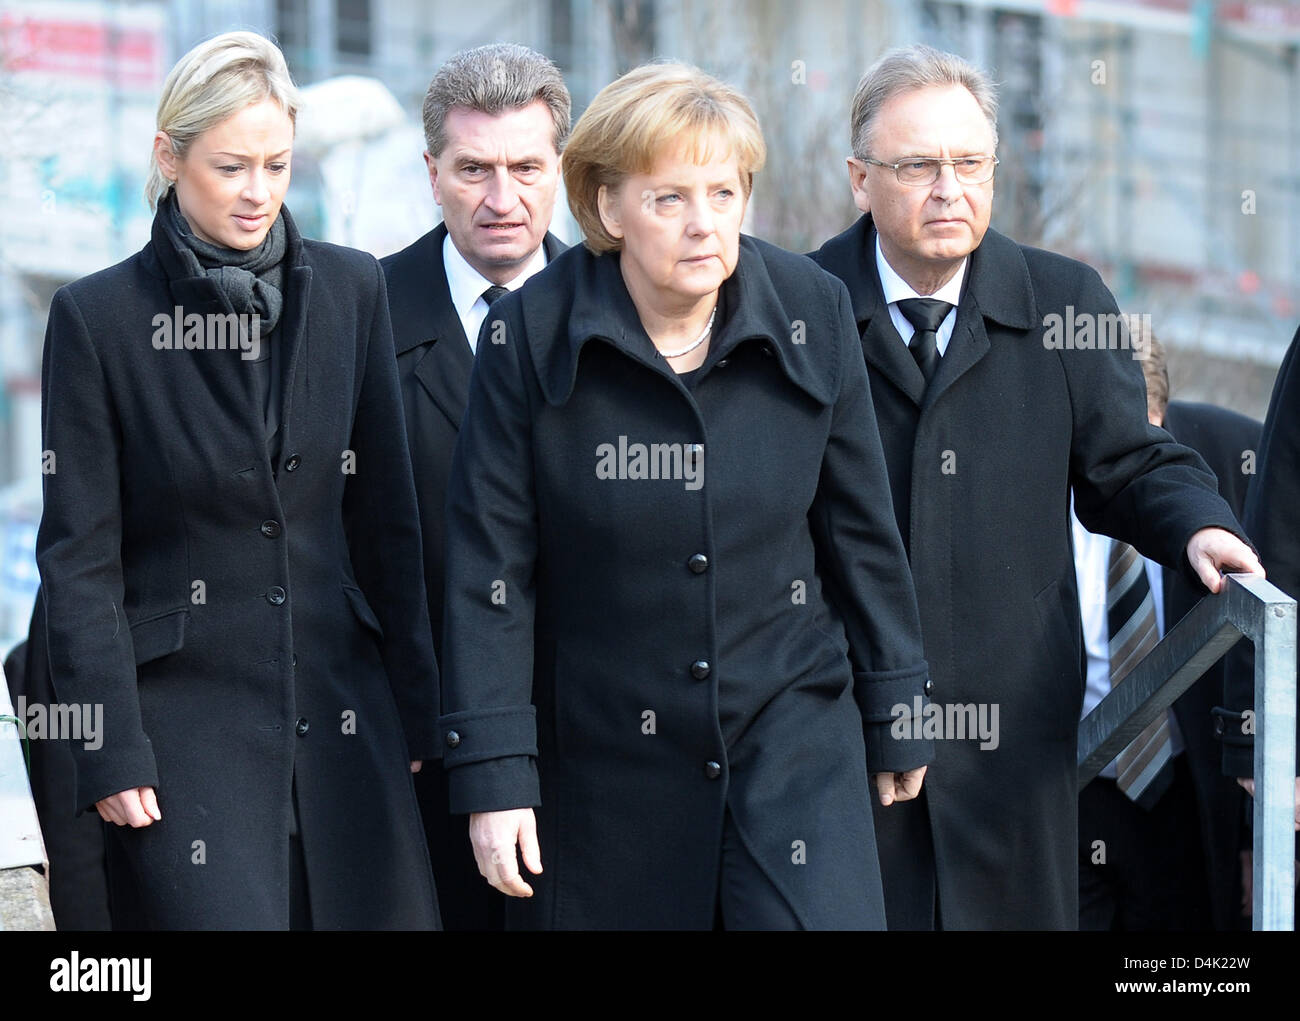 German Chancellor Angela Merkel (C), the Prime Minister of Baden-Wuertemmberg Baden-Württemberg, Guenther Oettinger (2-L) his partner Friederike Beyer (L) and the President of the Federal Constitutional Court, Hans-Juergen Papier (R) arrive for the official memorial service at St. Karl Borromaeus Church in Winnenden, Germany, 21 March 2009. Mourners commemorated the 15 vicitims kil Stock Photo